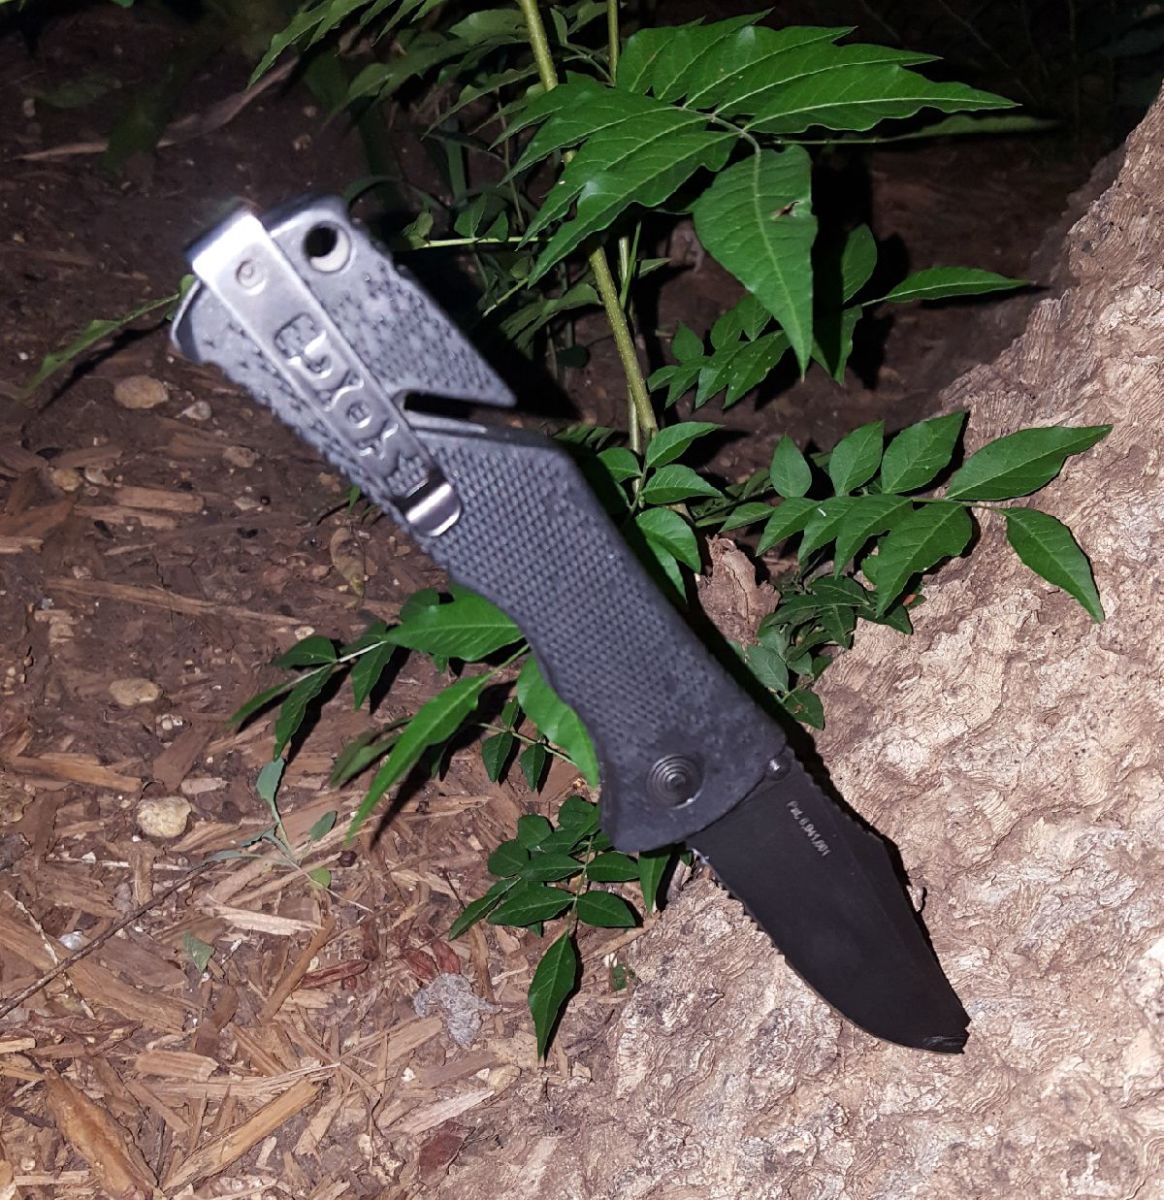 SOG Trident: A Budget-Friendly Tactical Knife